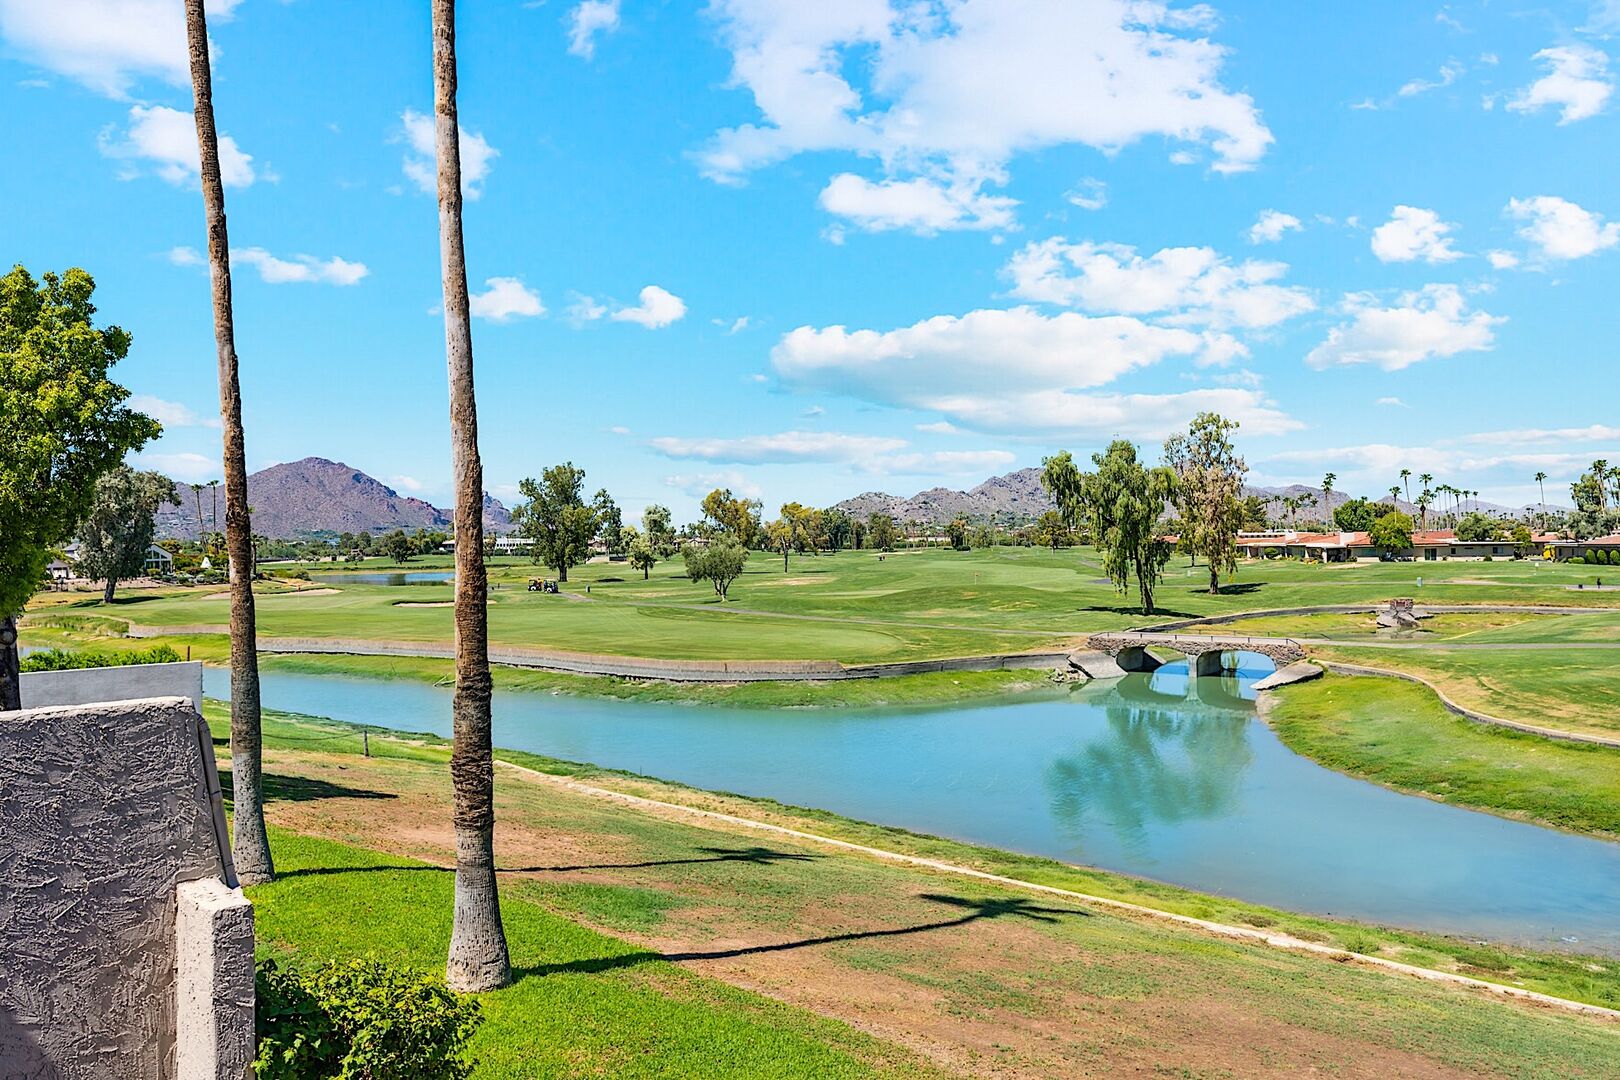 Panoramic views of Camelback Mountain & McCormick Ranch Golf Course from balcony.